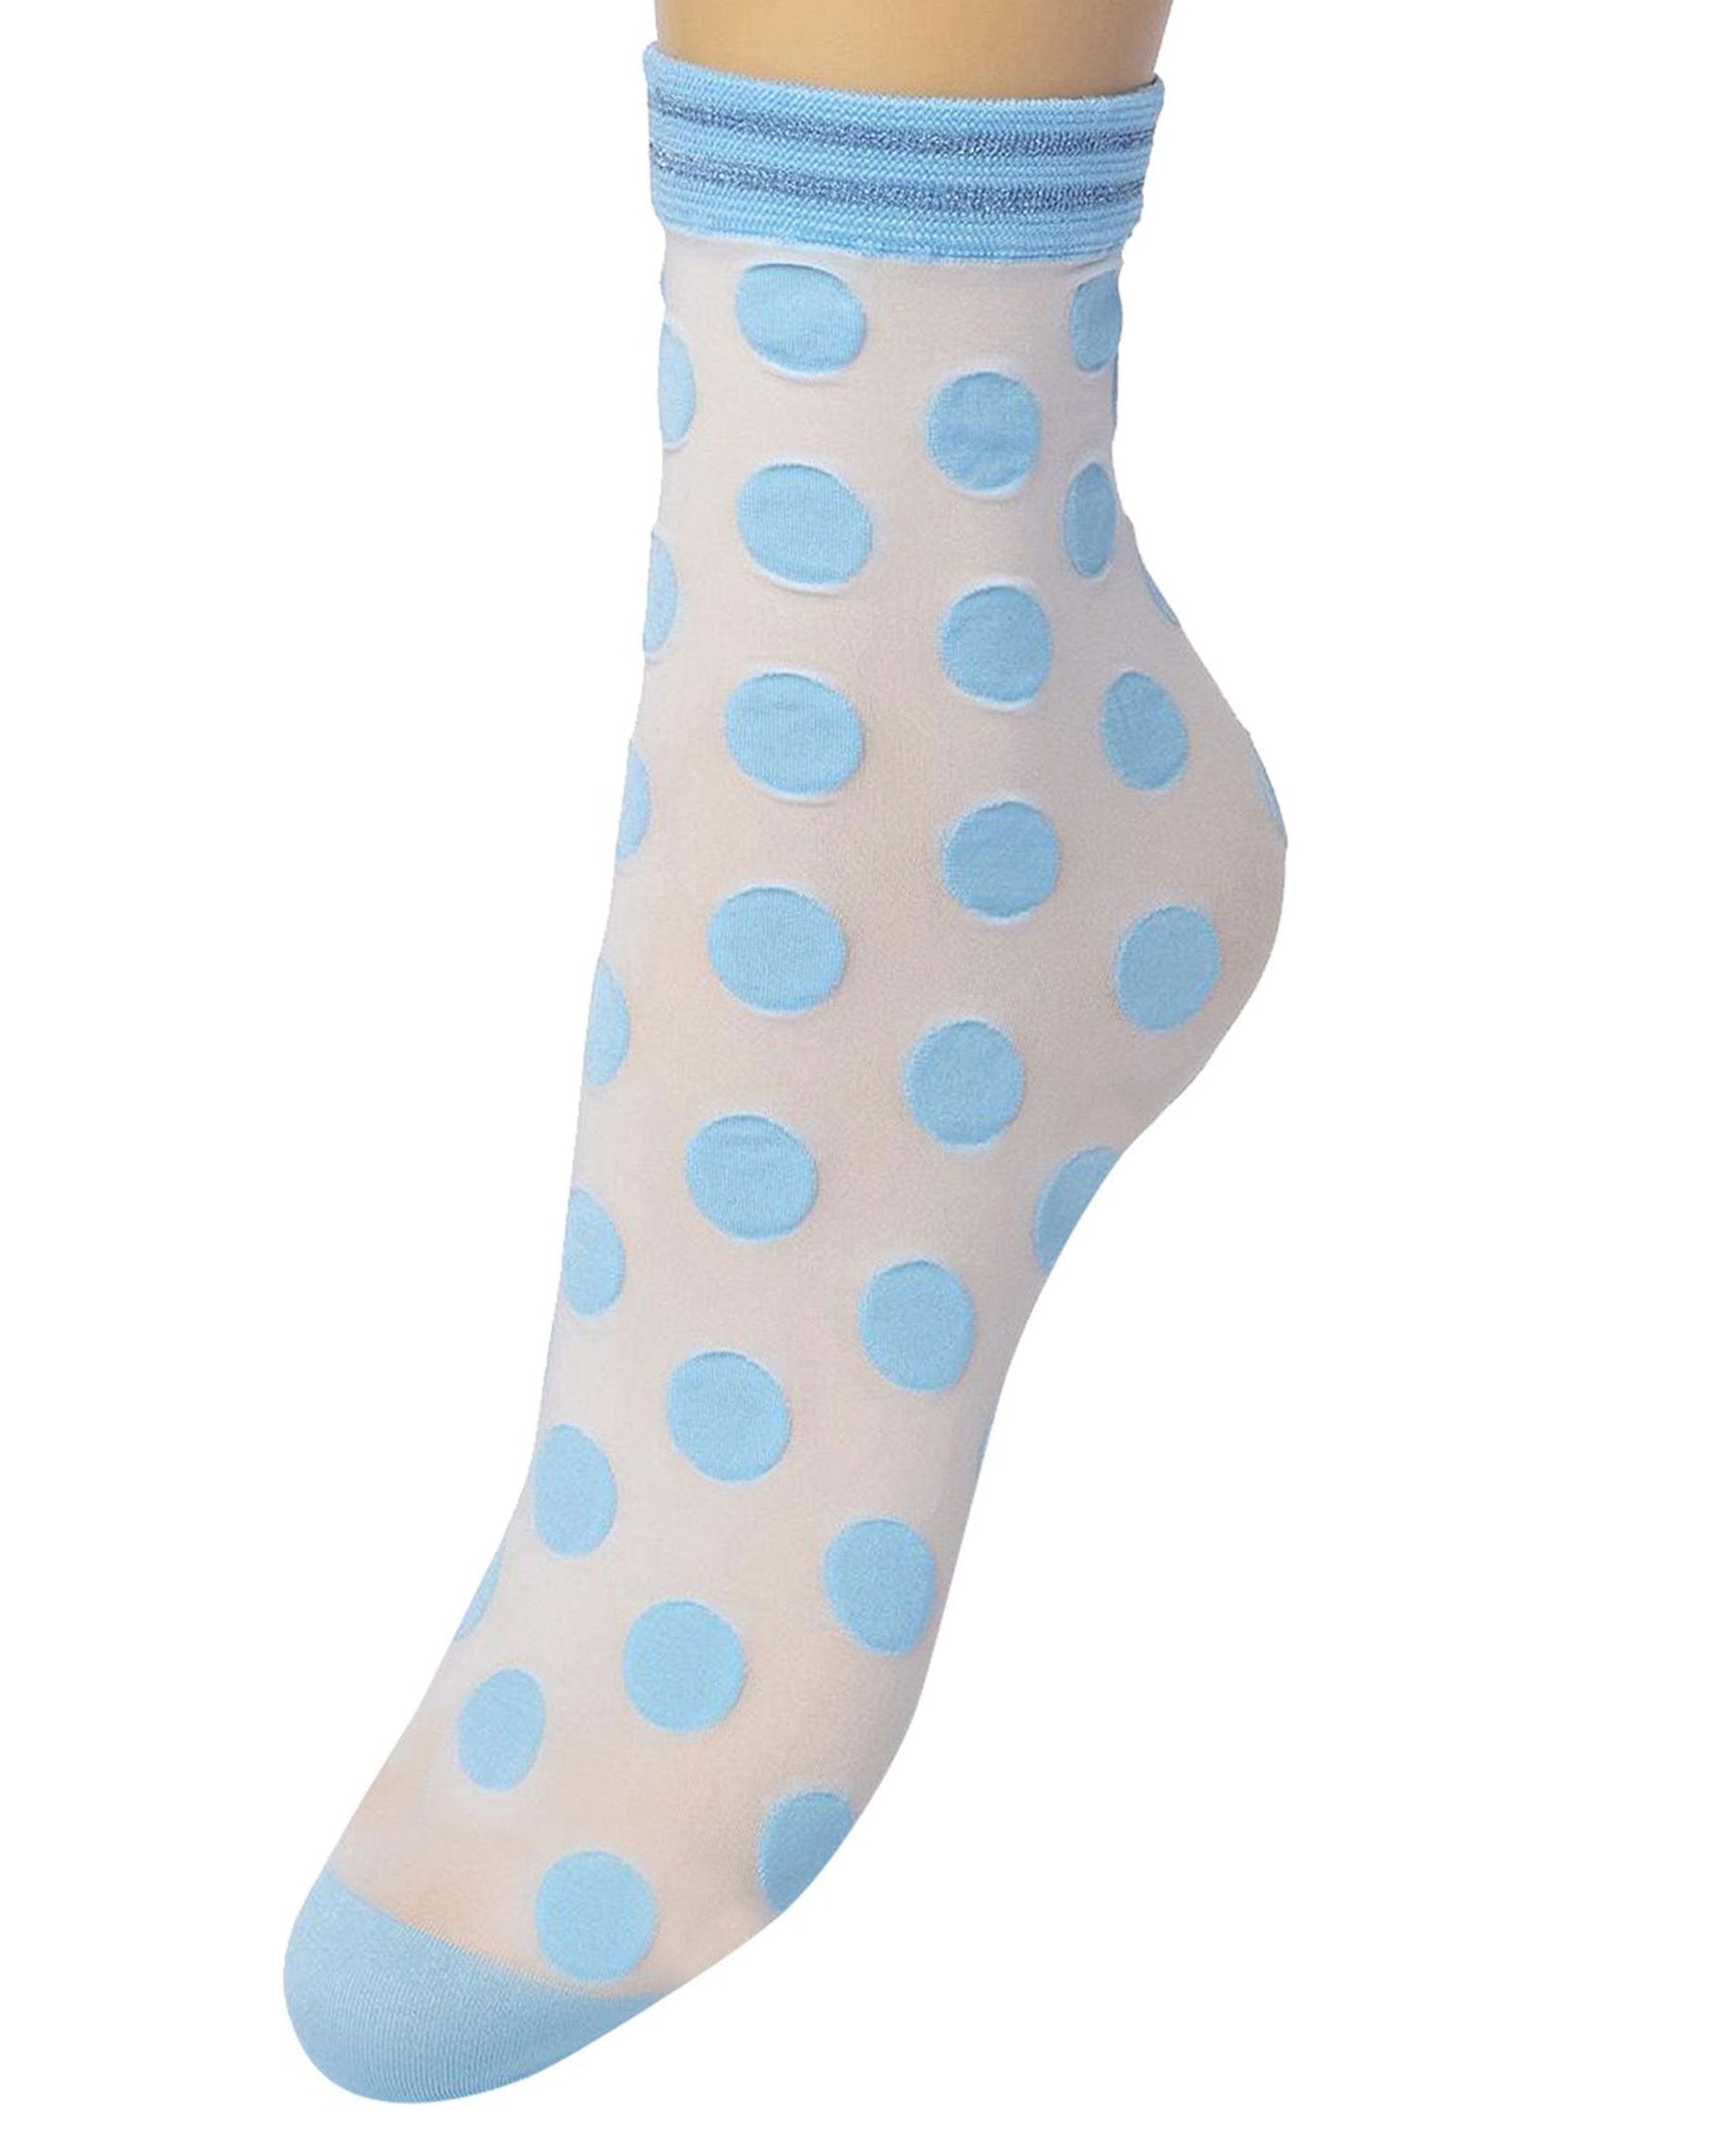 Bonnie Doon Big Dots Socks - White semi-opaque fashion ankle socks with a light blue polka dot pattern, reinforced toe and striped sparkly lurex cuff.